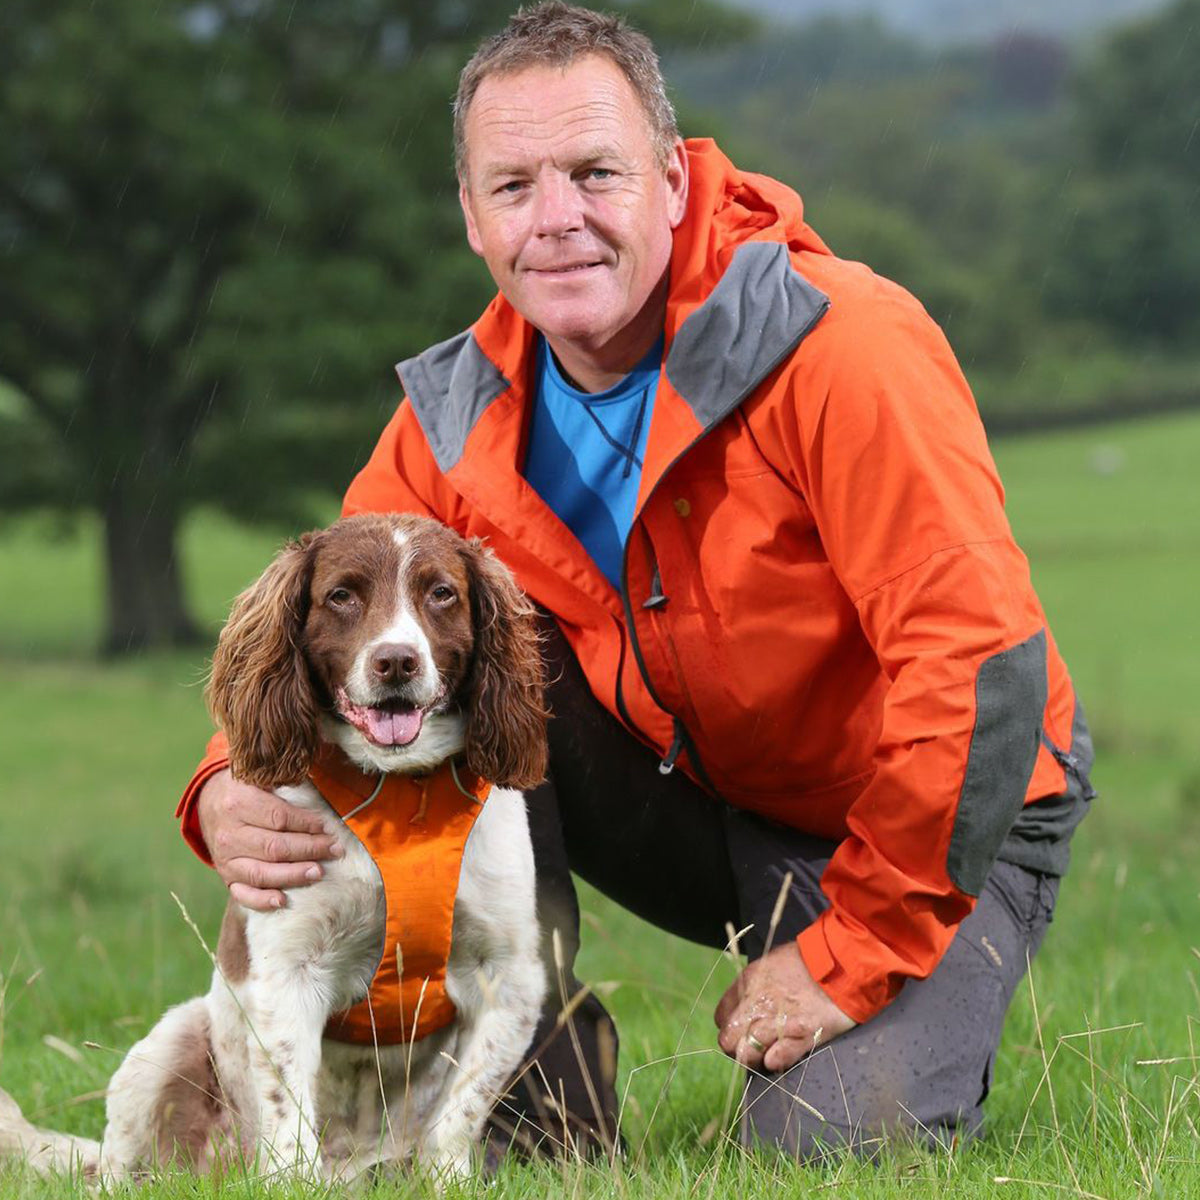 Kerry poses on the trail with his dog in an orange front harness that matches his raincoat.